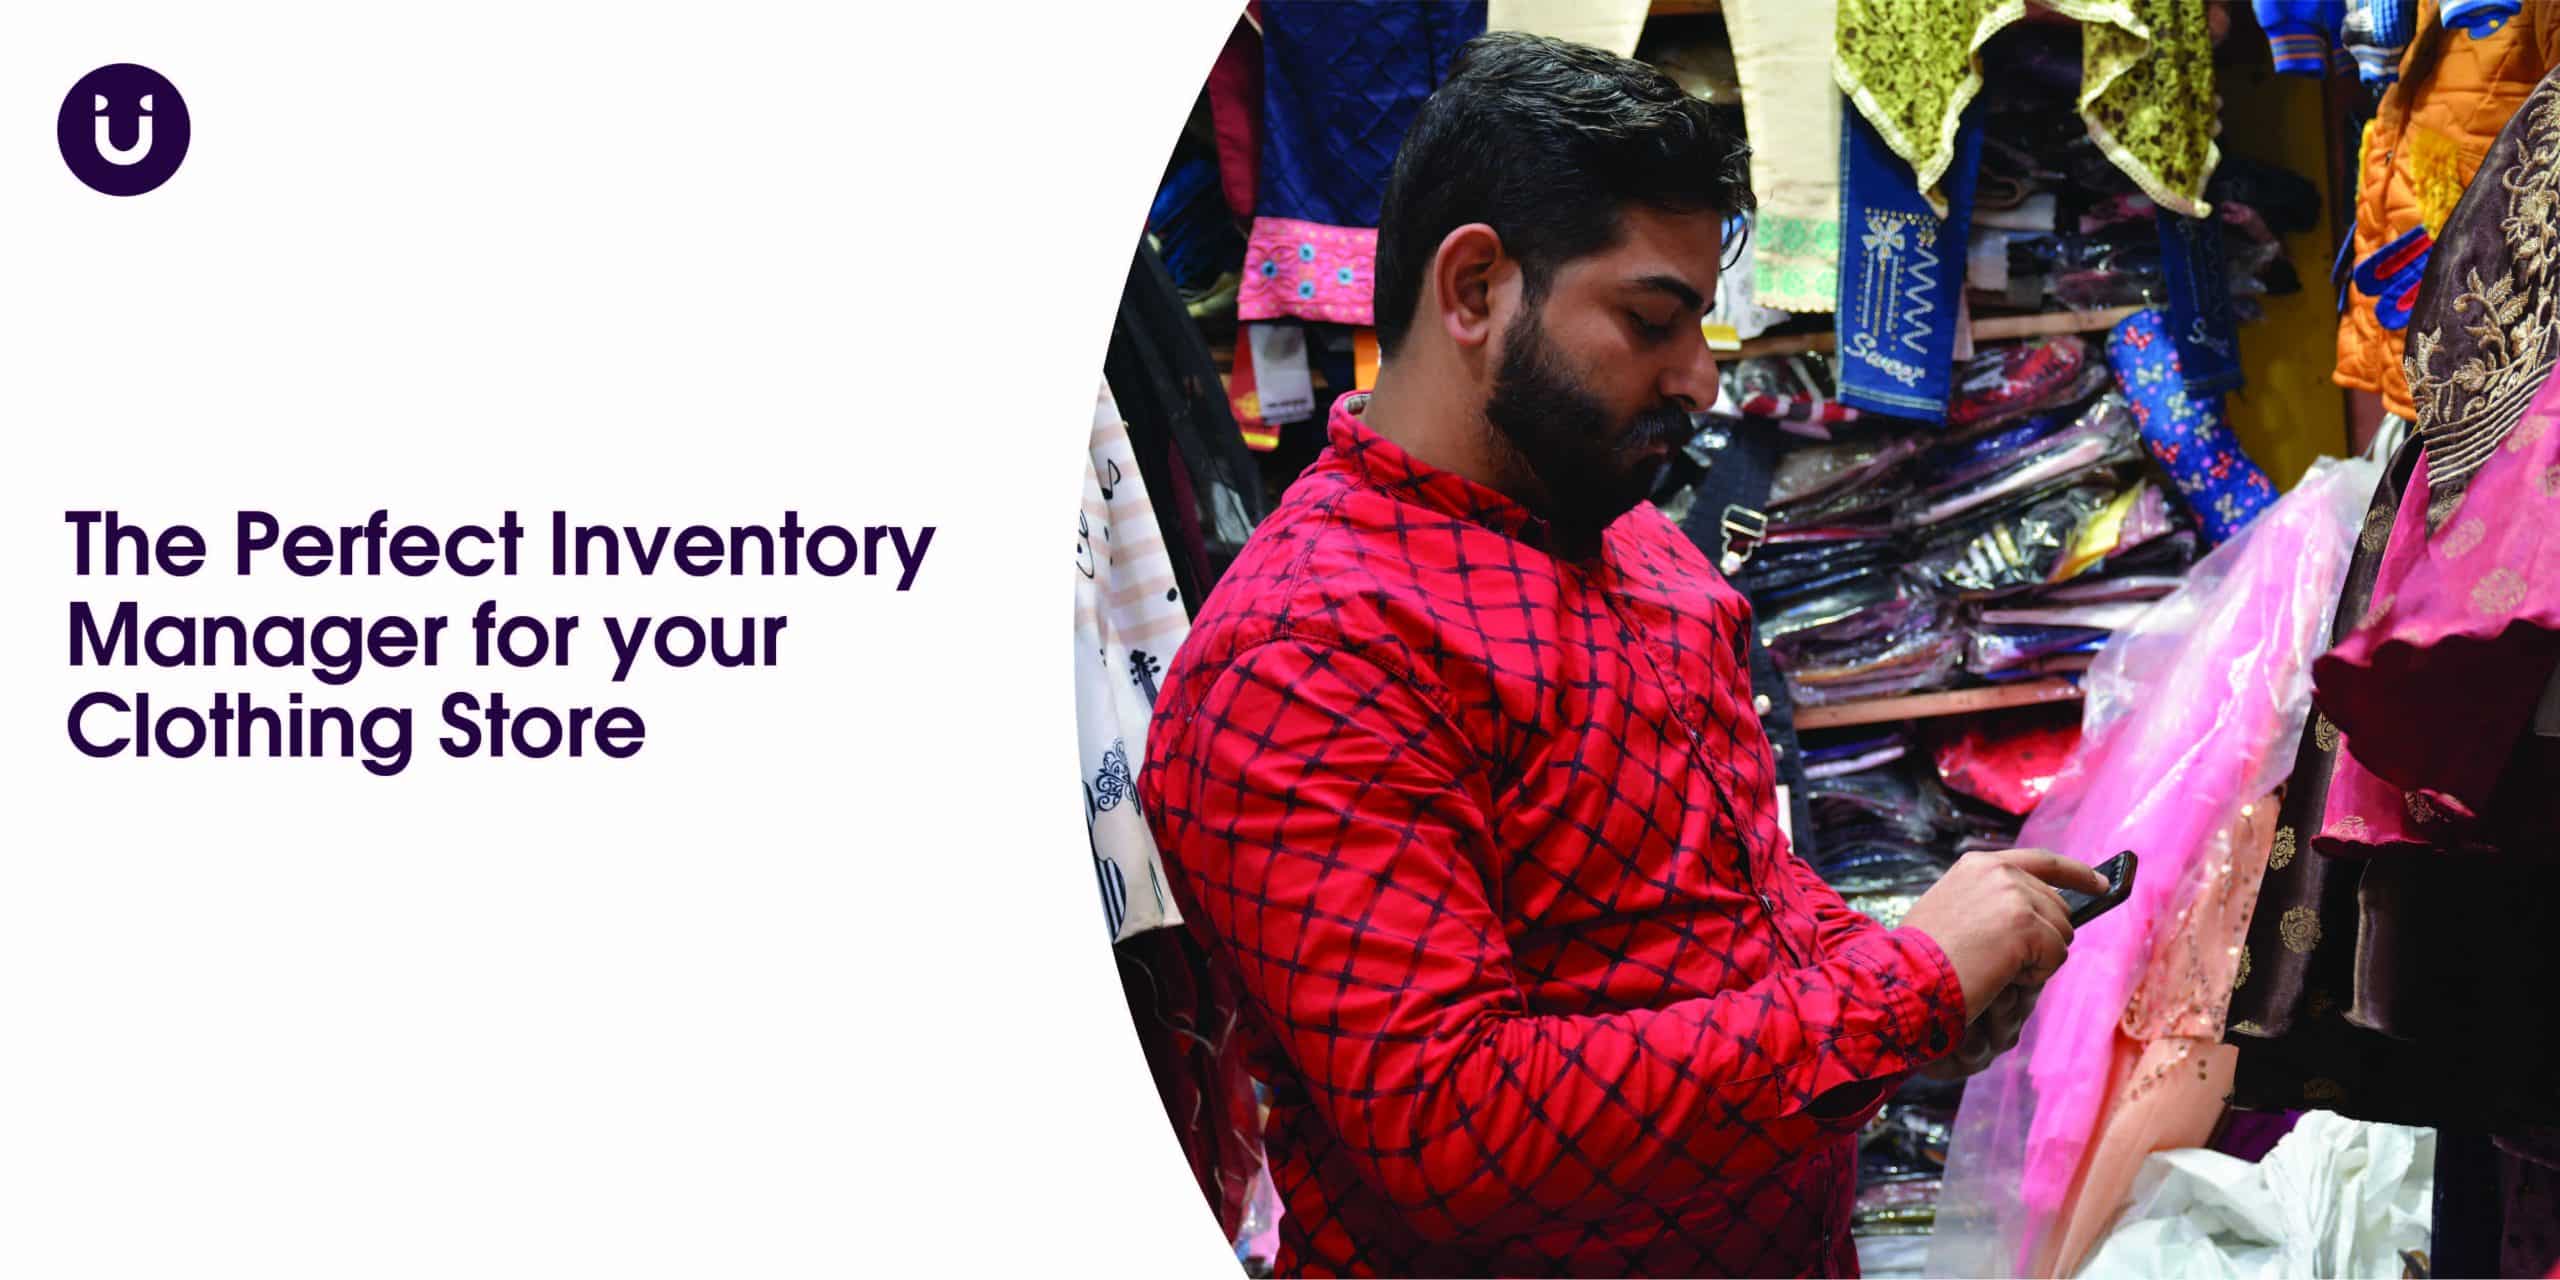 The Perfect Inventory Manager for your Clothing Store